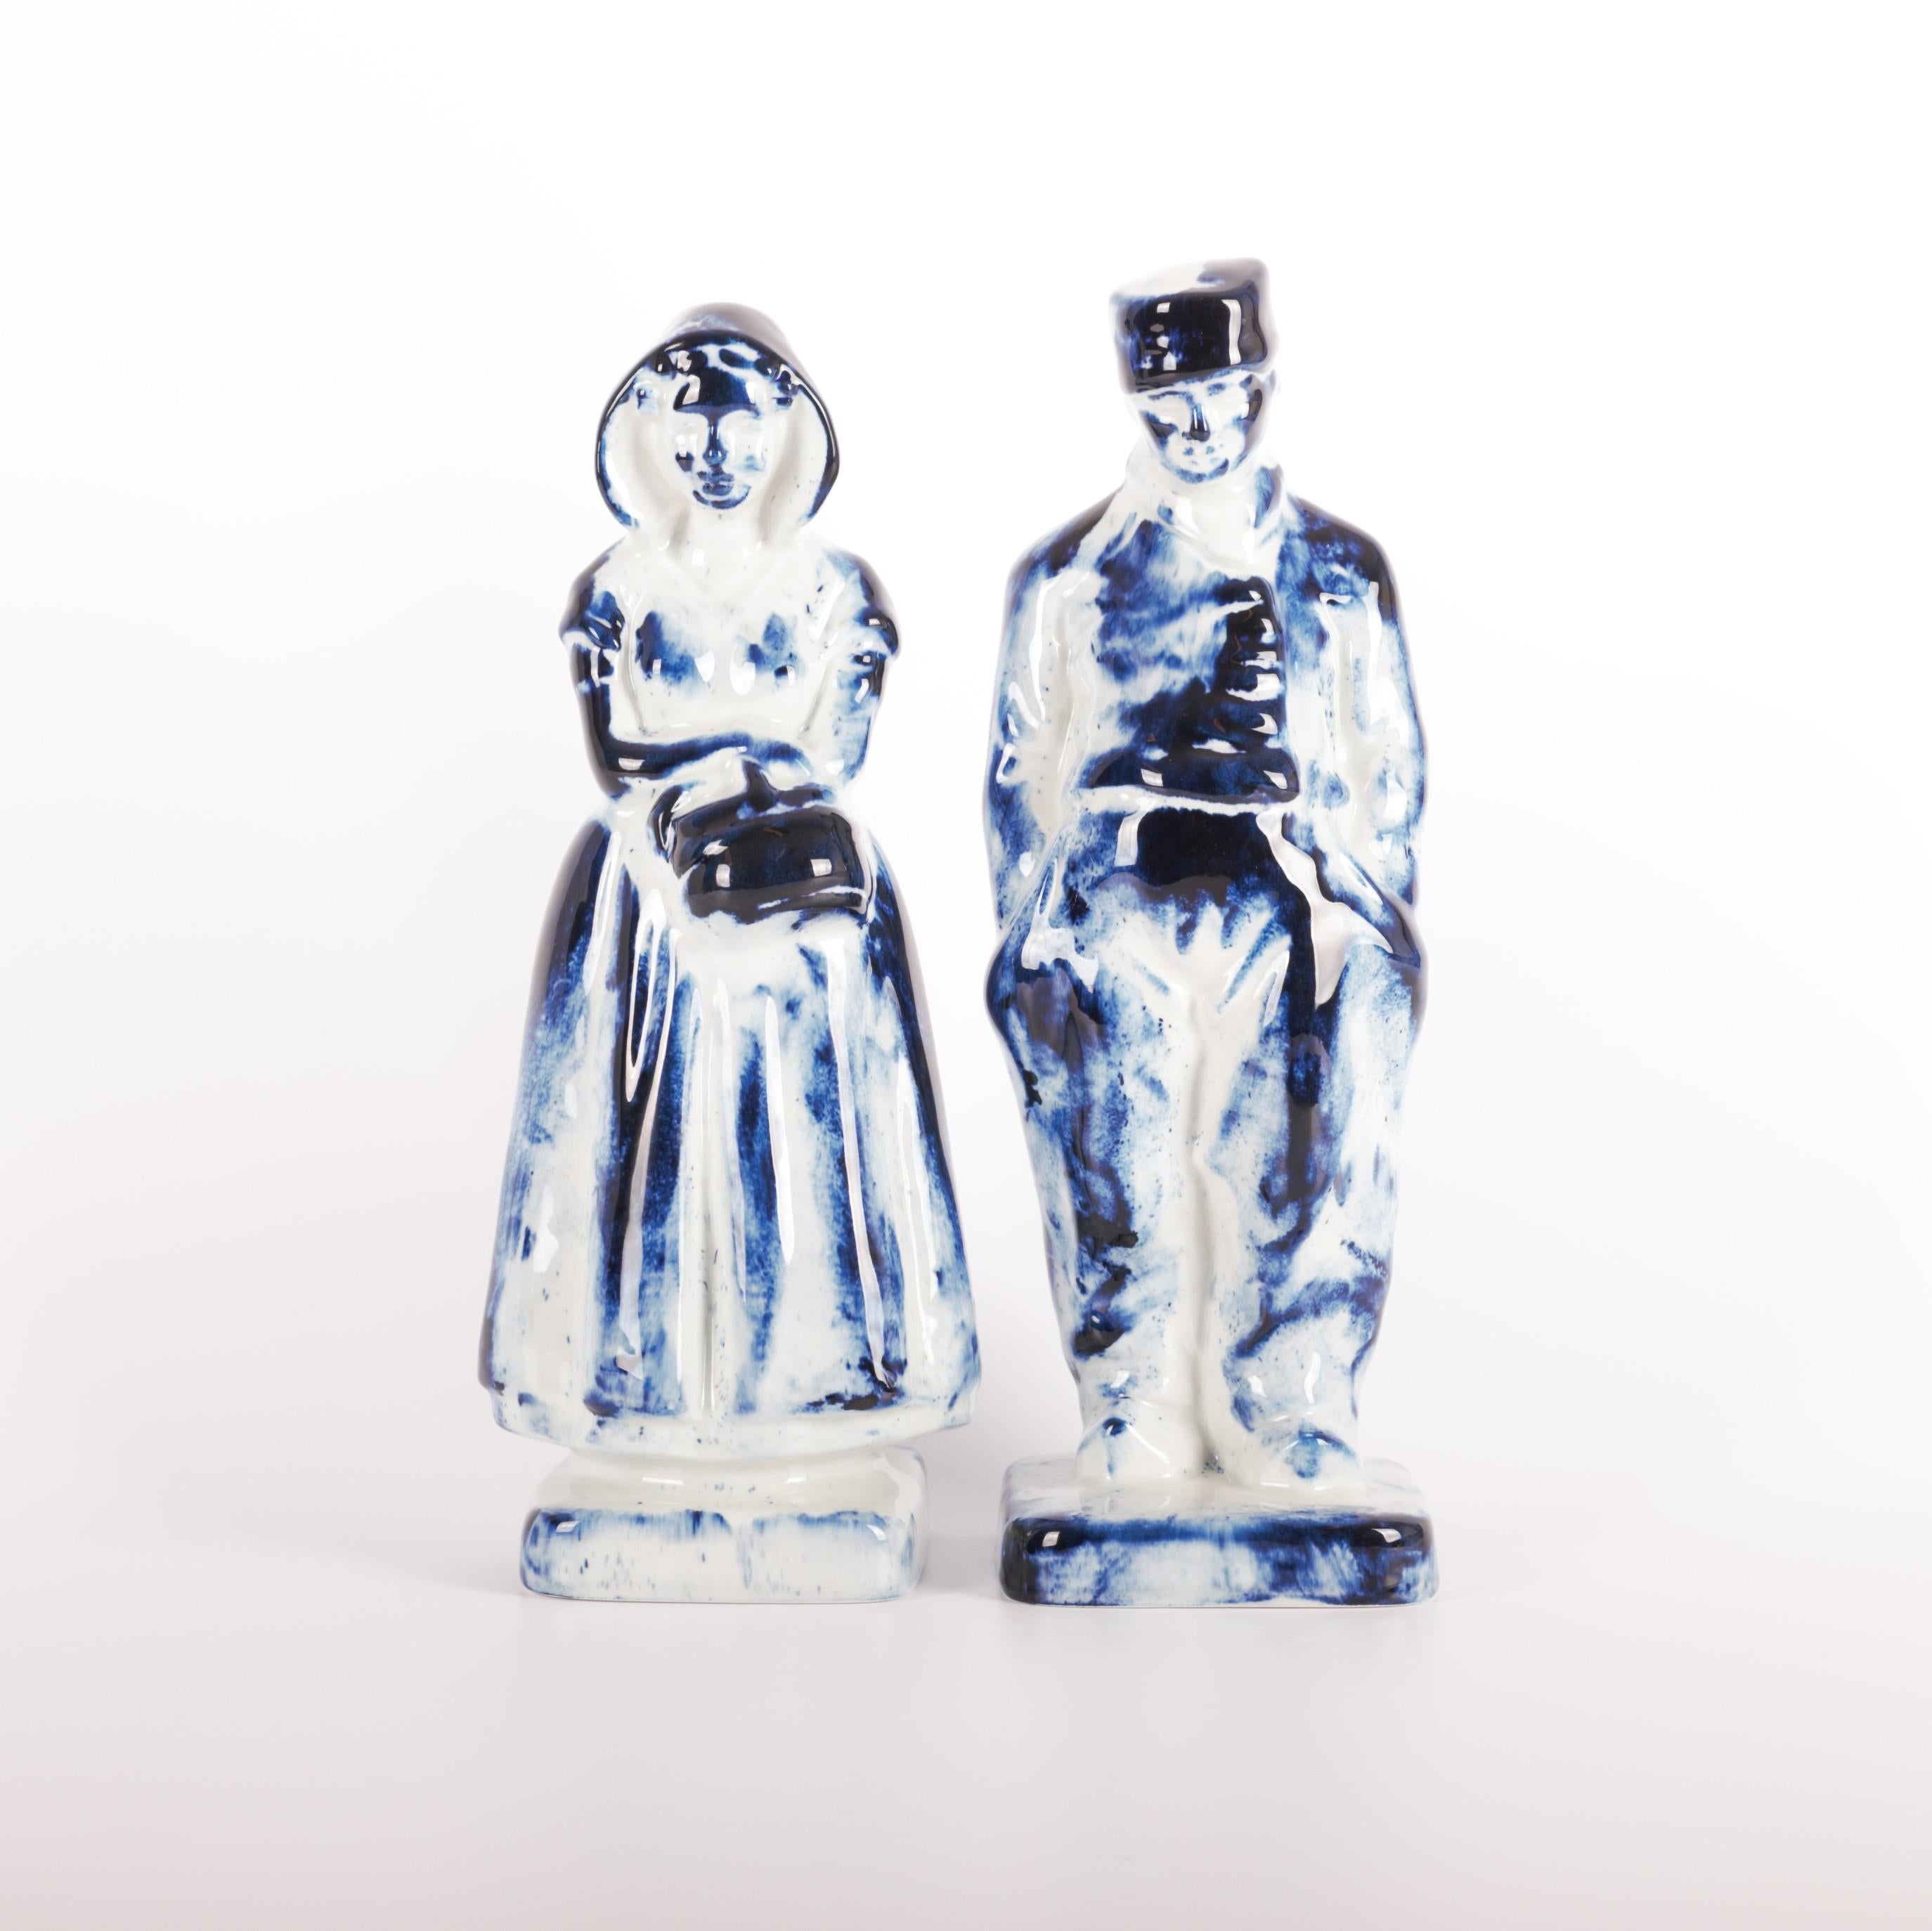 The set of One Minute Delft Blue Farmer & Farmer Wife available as an exclusive Personal Edition, Marcel Wanders' label carrying works of a more personal and experimental nature. The pieces of the Delft Blue series are unlimited unique by Marcel's